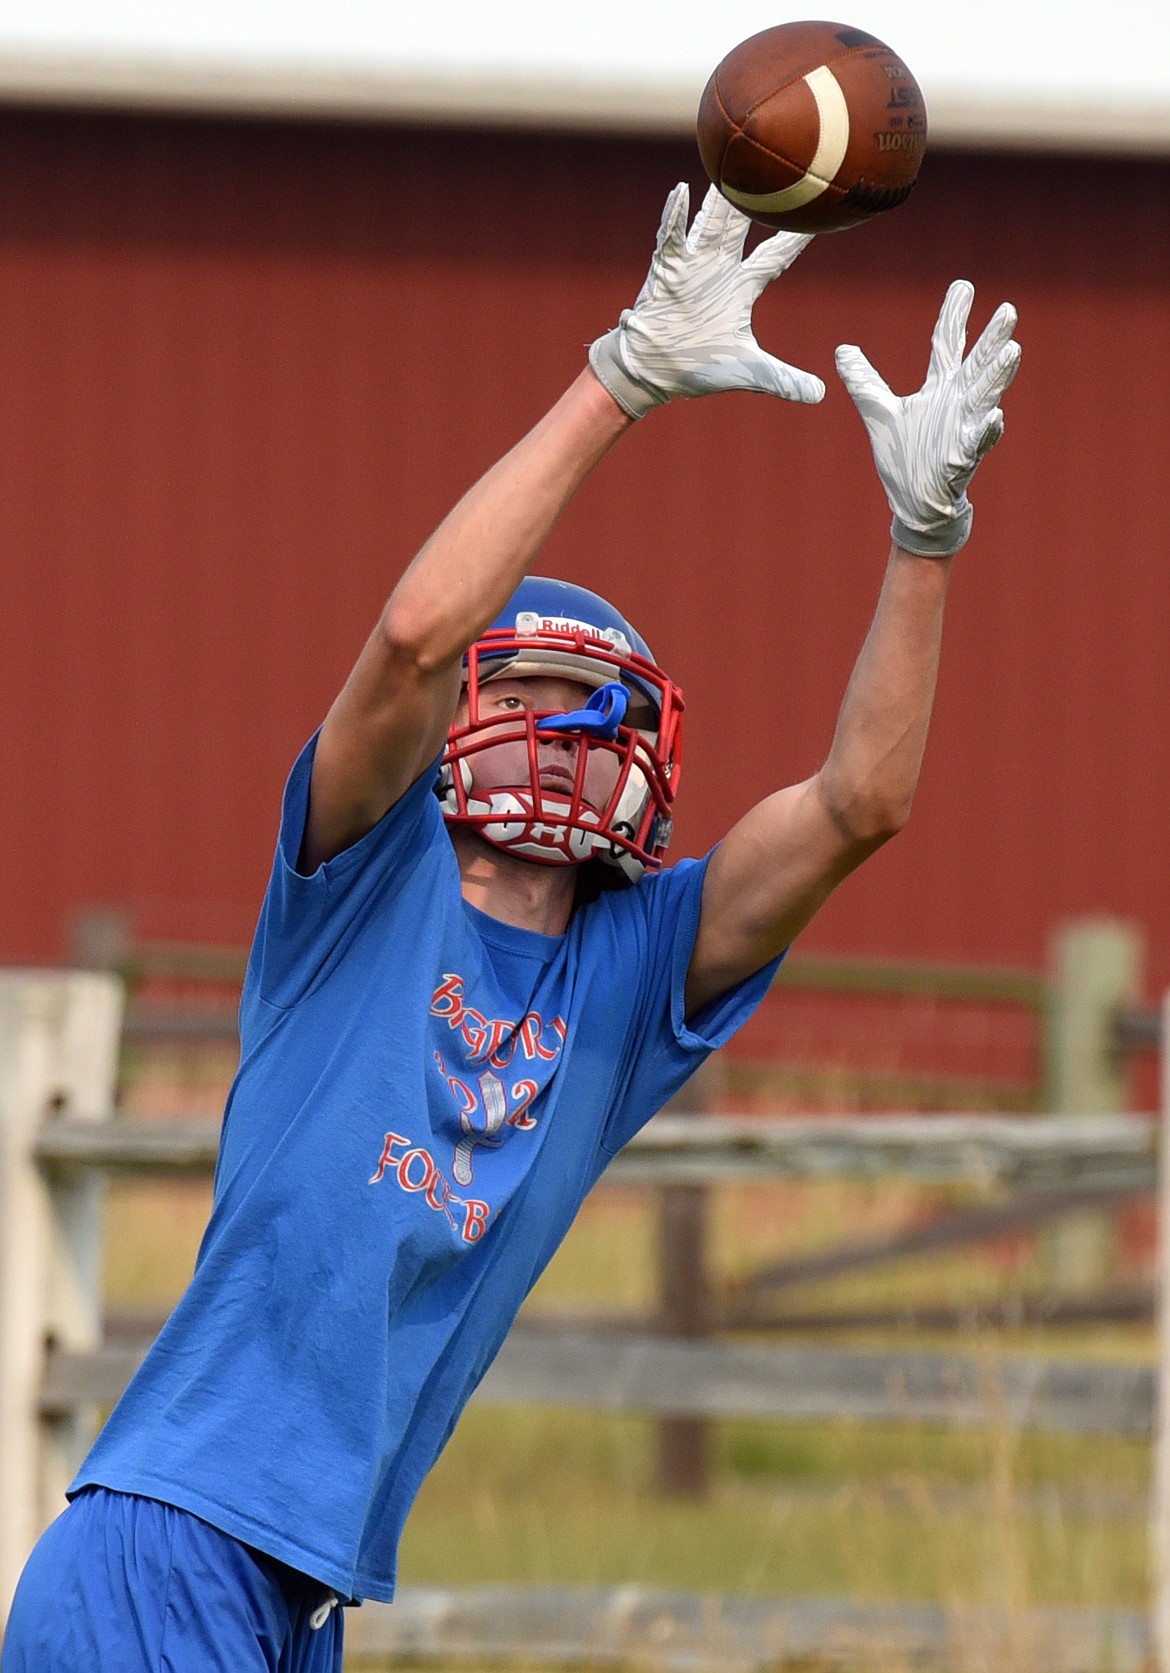 Isak Epperly goes up to catch a pass during Vikings football practice Friday. (Jeremy Weber/Bigfork Eagle)